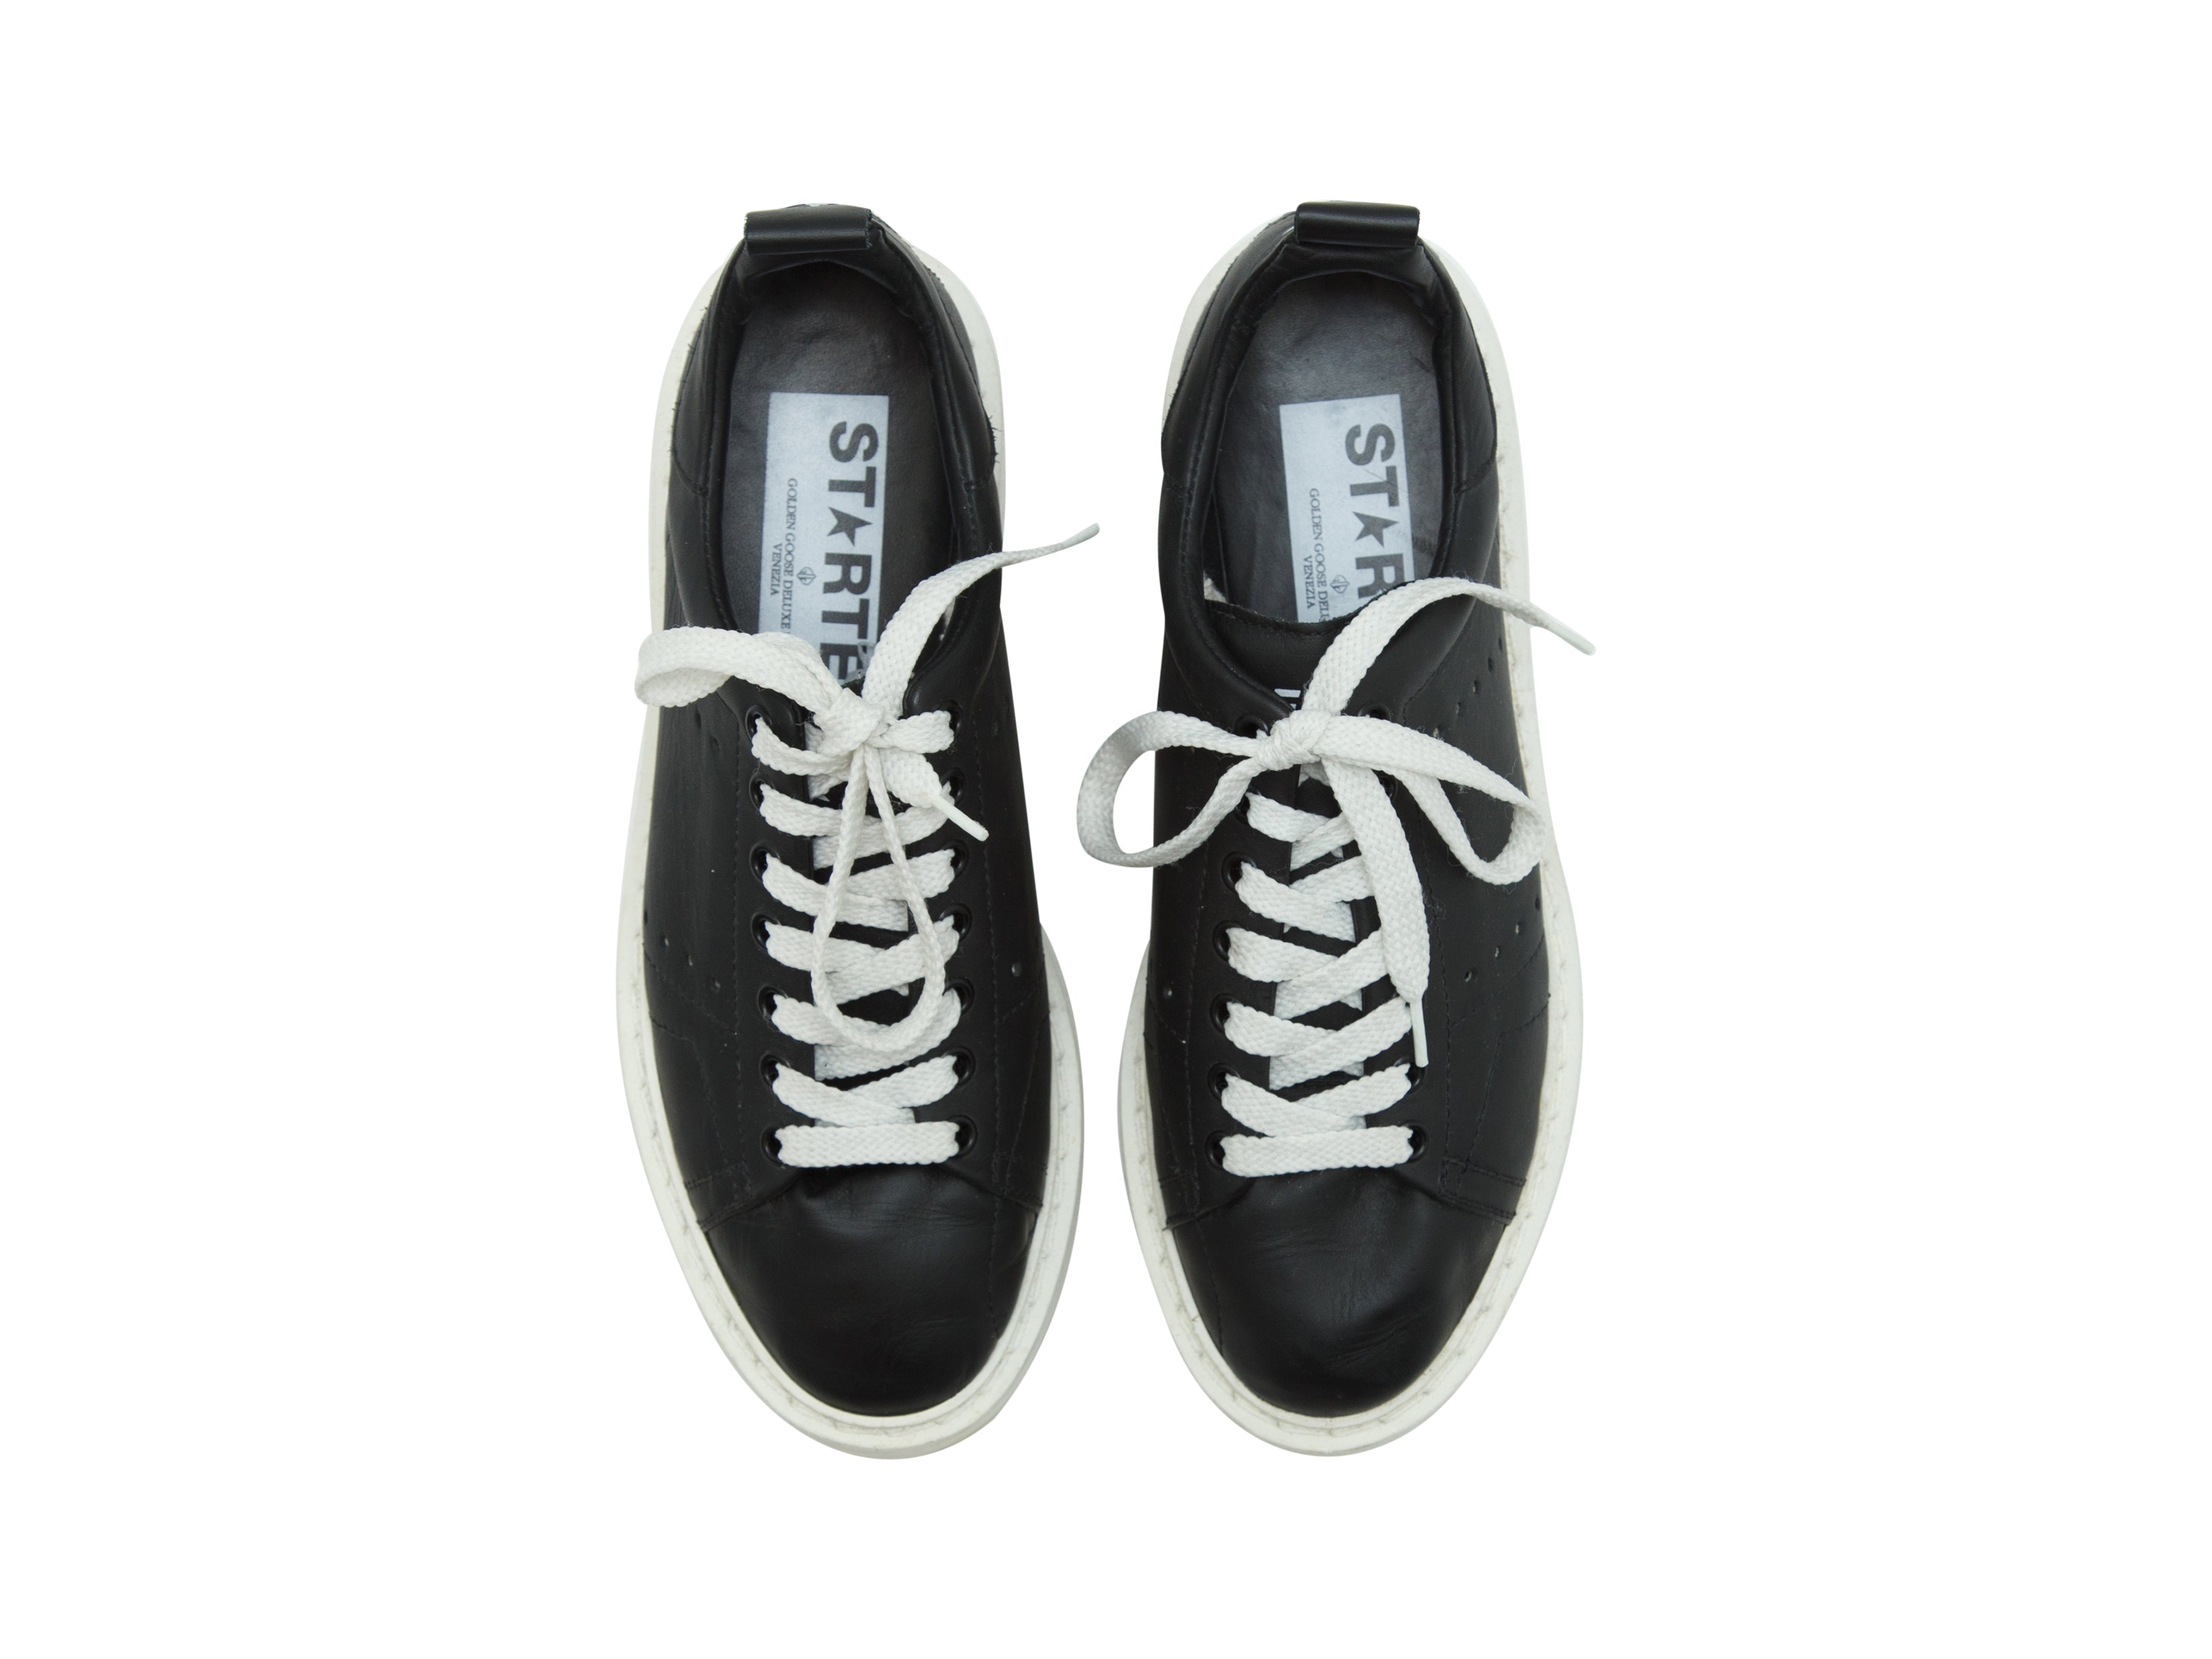 afterpay golden goose sneakers